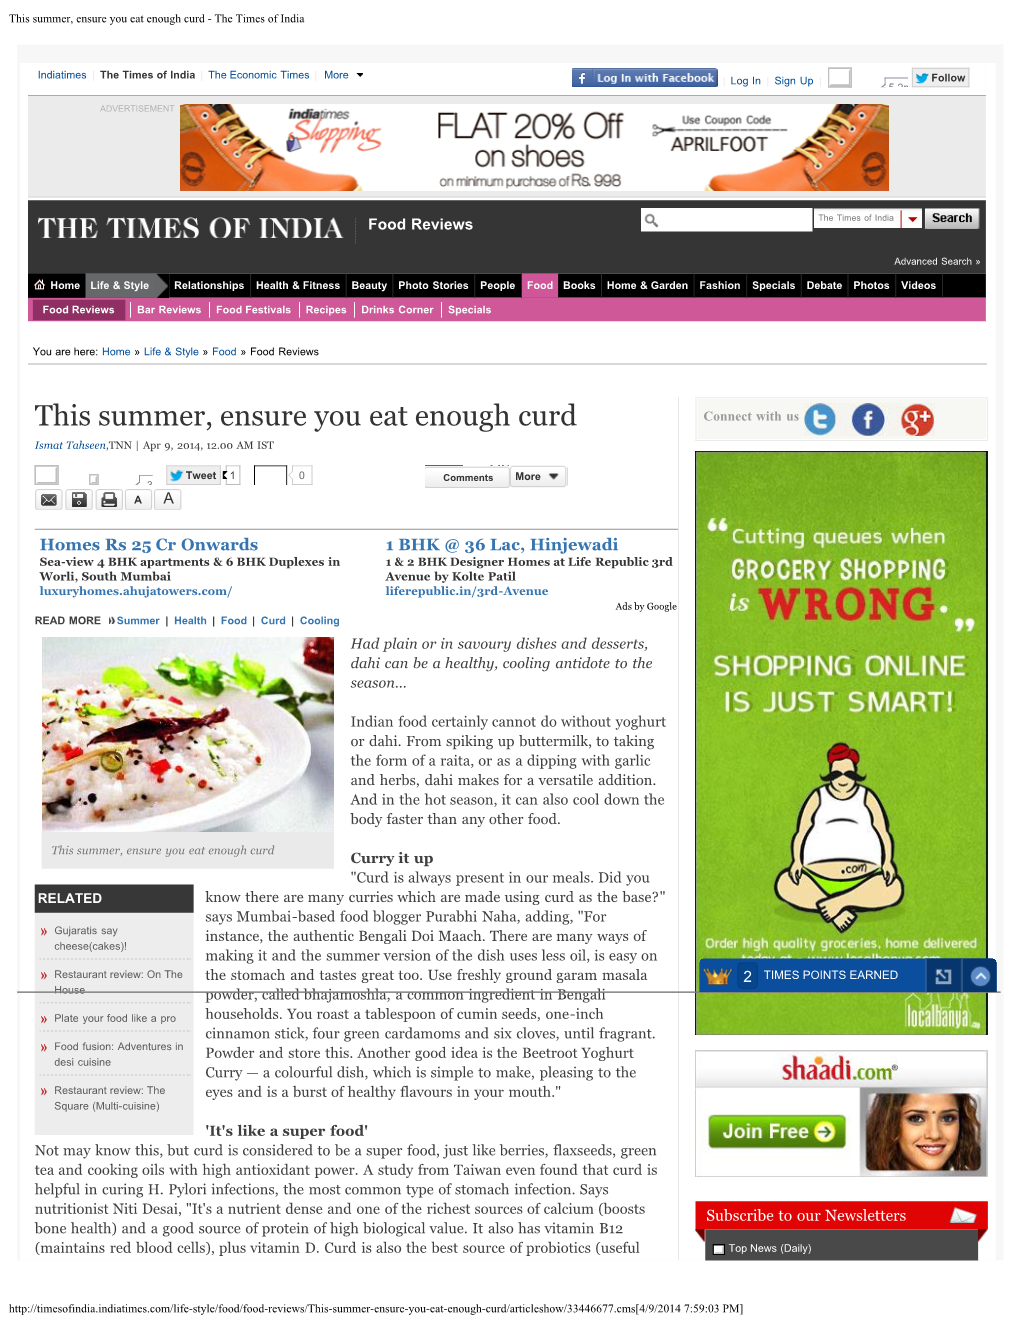 This Summer, Ensure You Eat Enough Curd - the Times of India